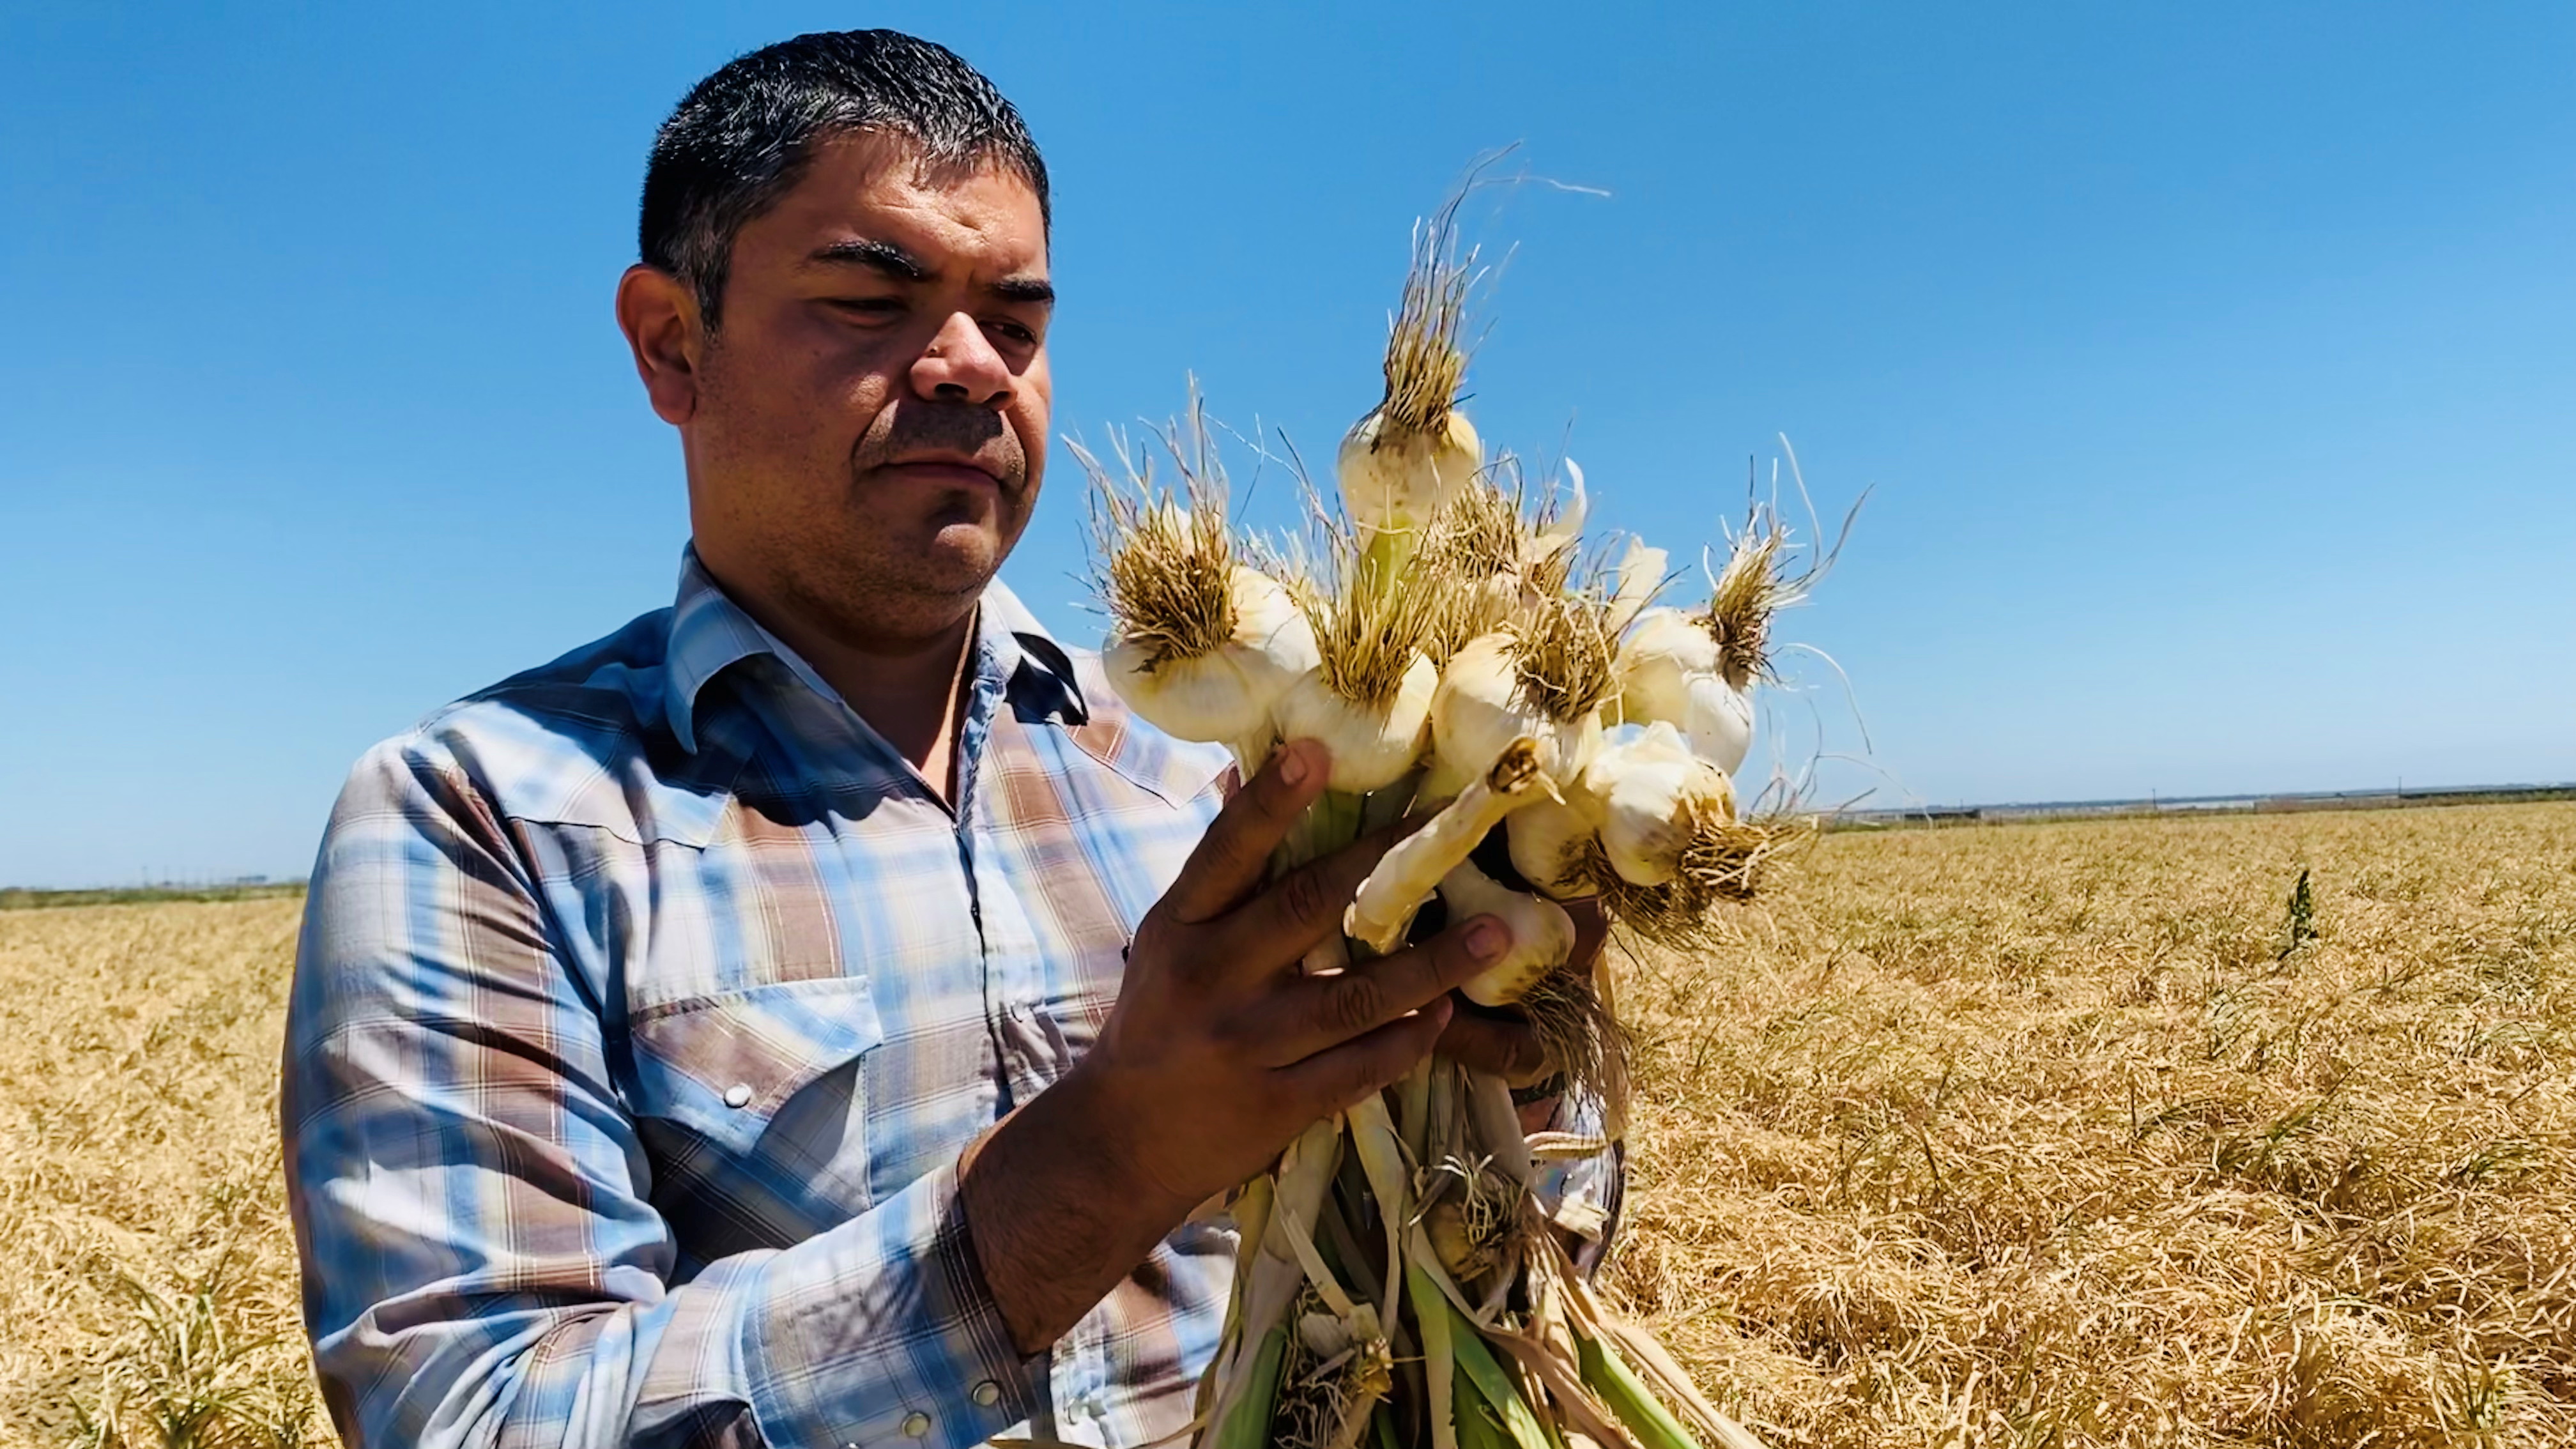 Salvador Parra, manager at Burford Ranch, is seen with a garlic crop he is preparing to harvest and sell